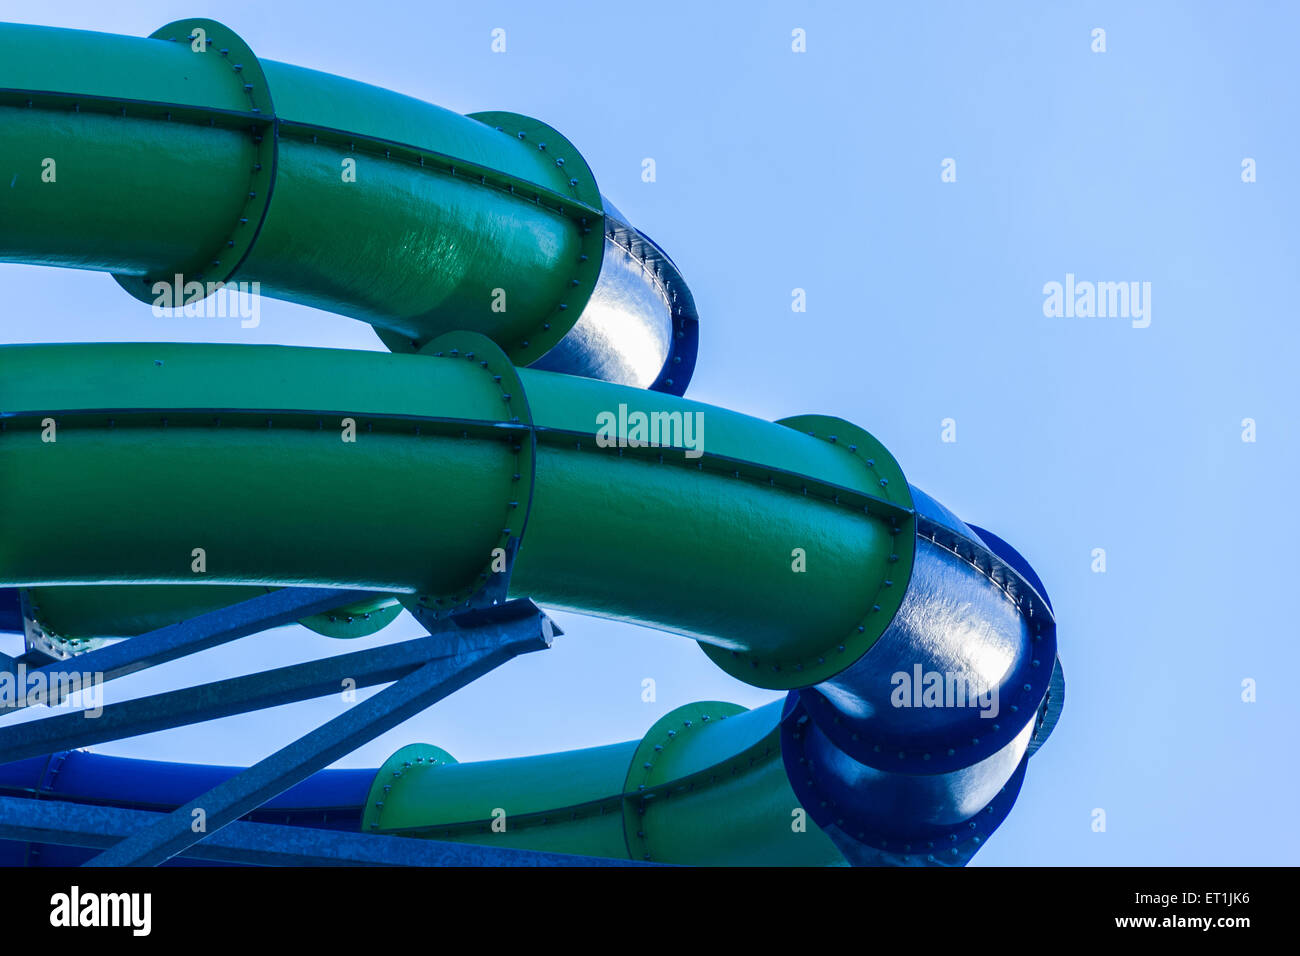 Tube spiral sections at water amusement park with blue sky. Stock Photo